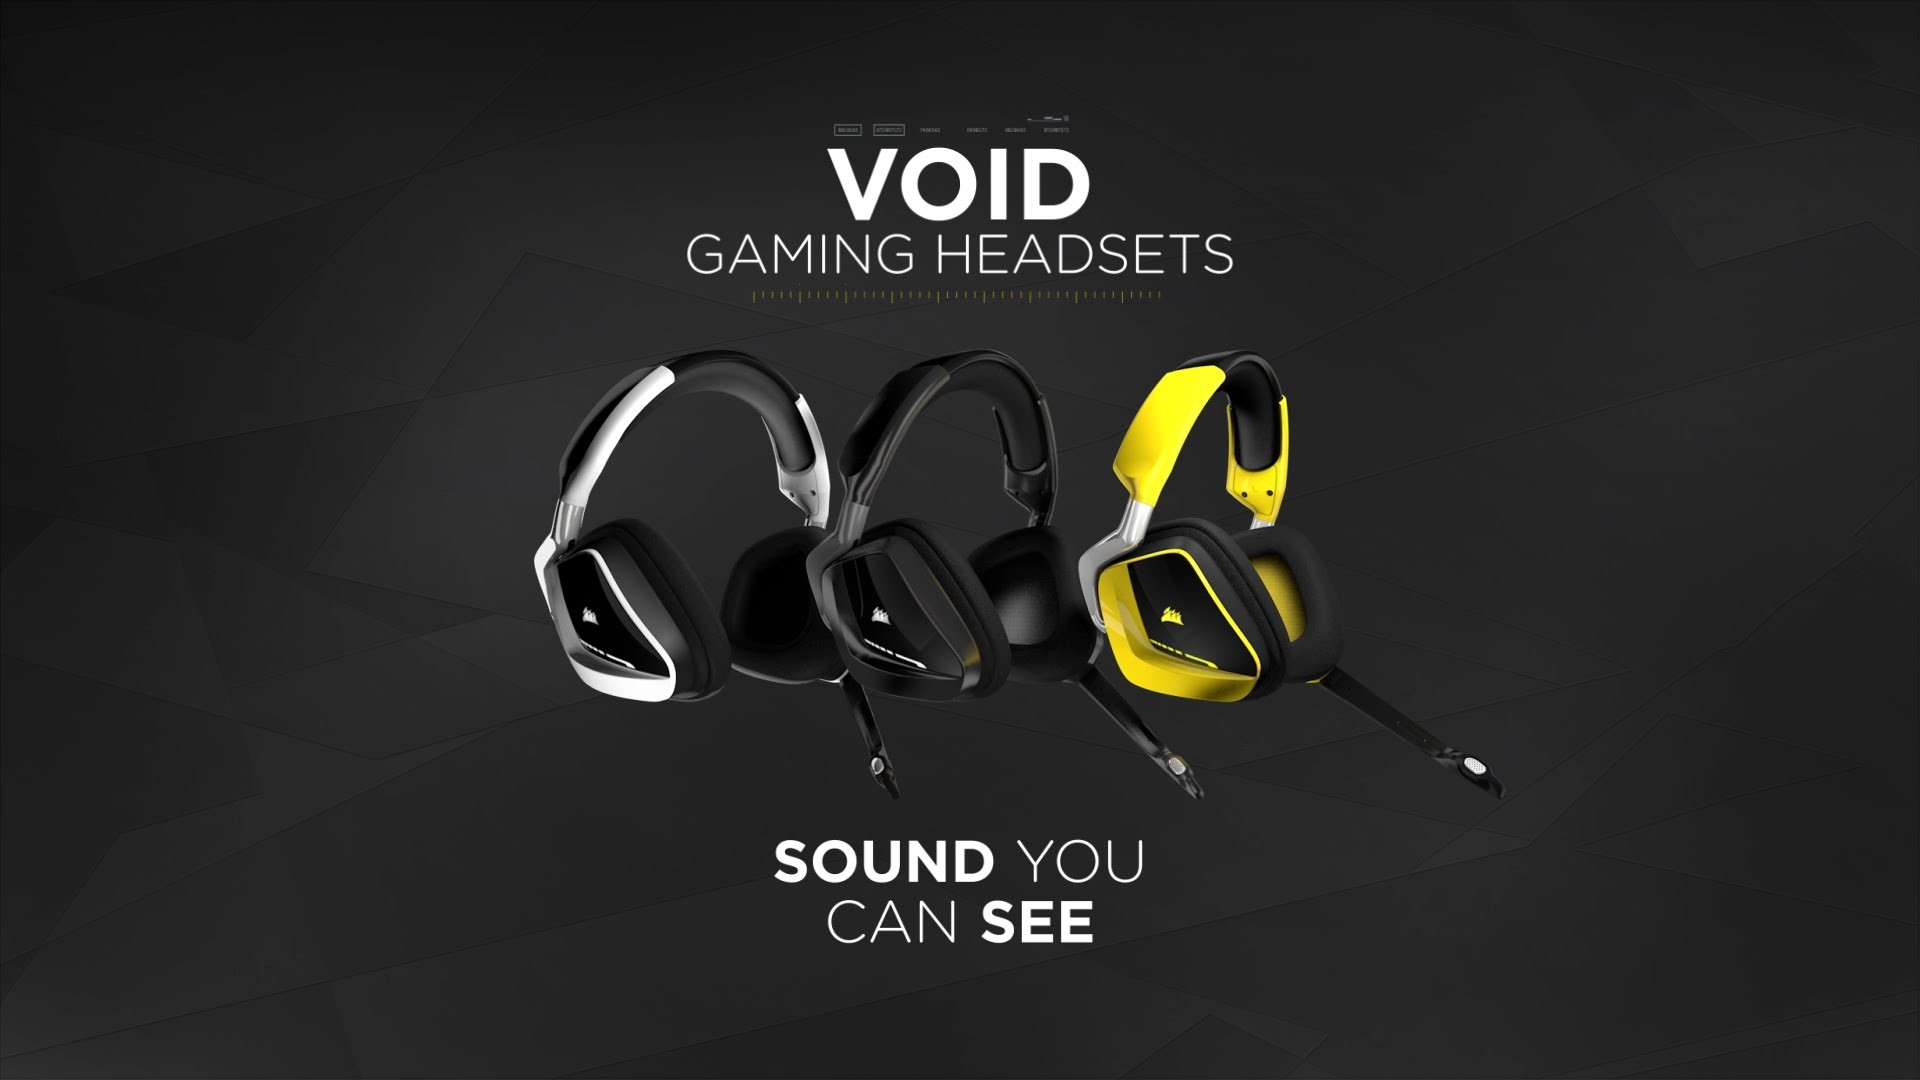 Corsair Void gaming headsets: the official product trailer!